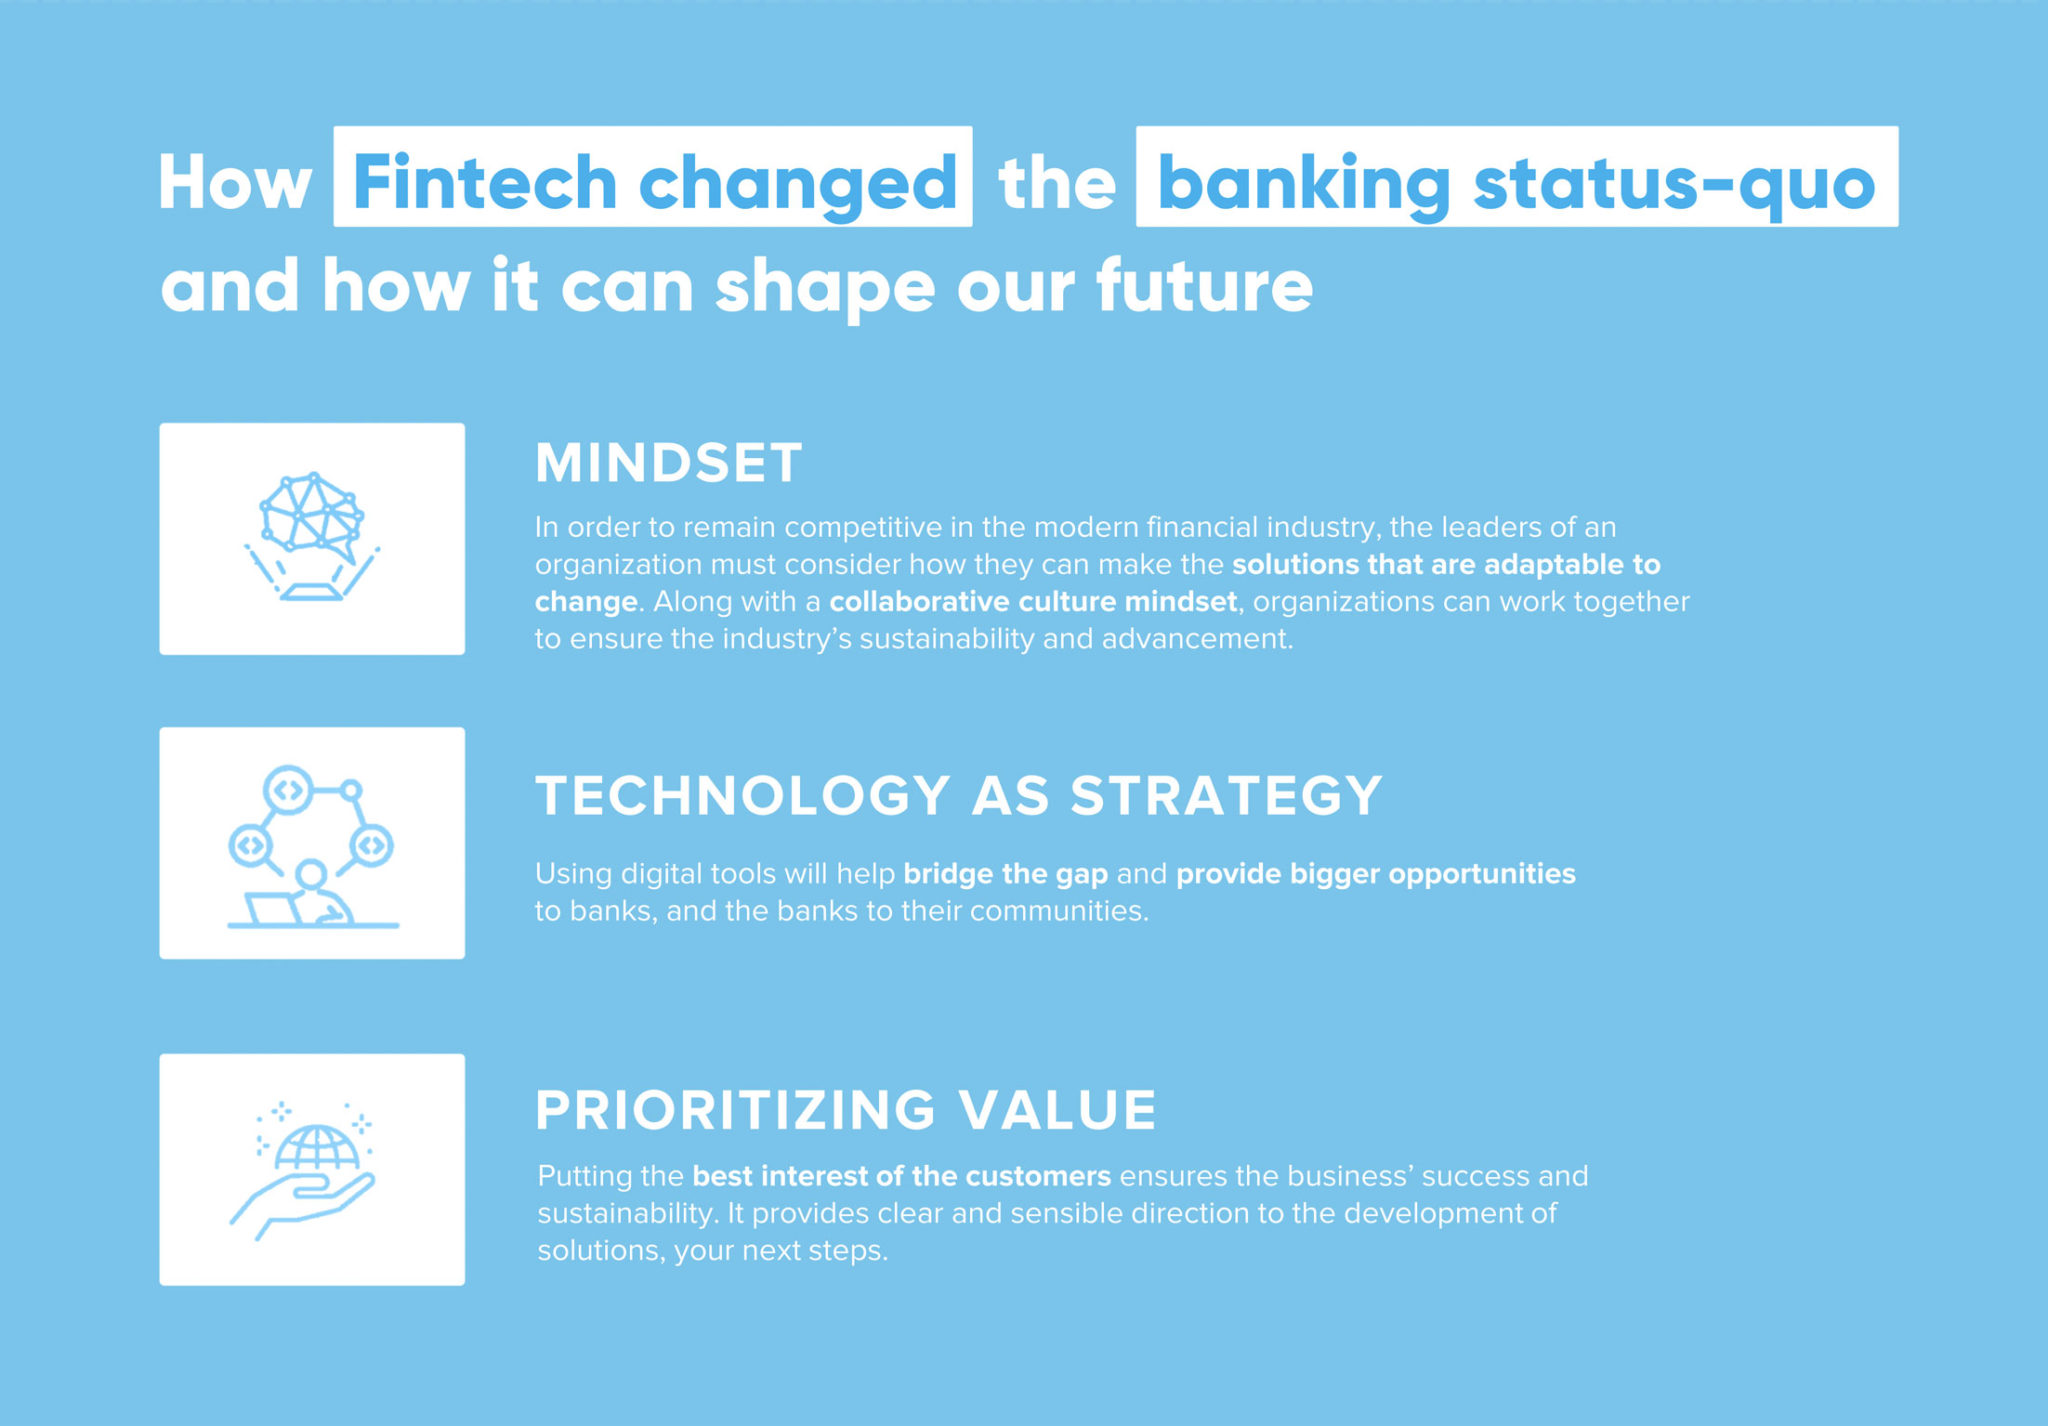 How Fintech changed the banking status qou and how it can shape our future